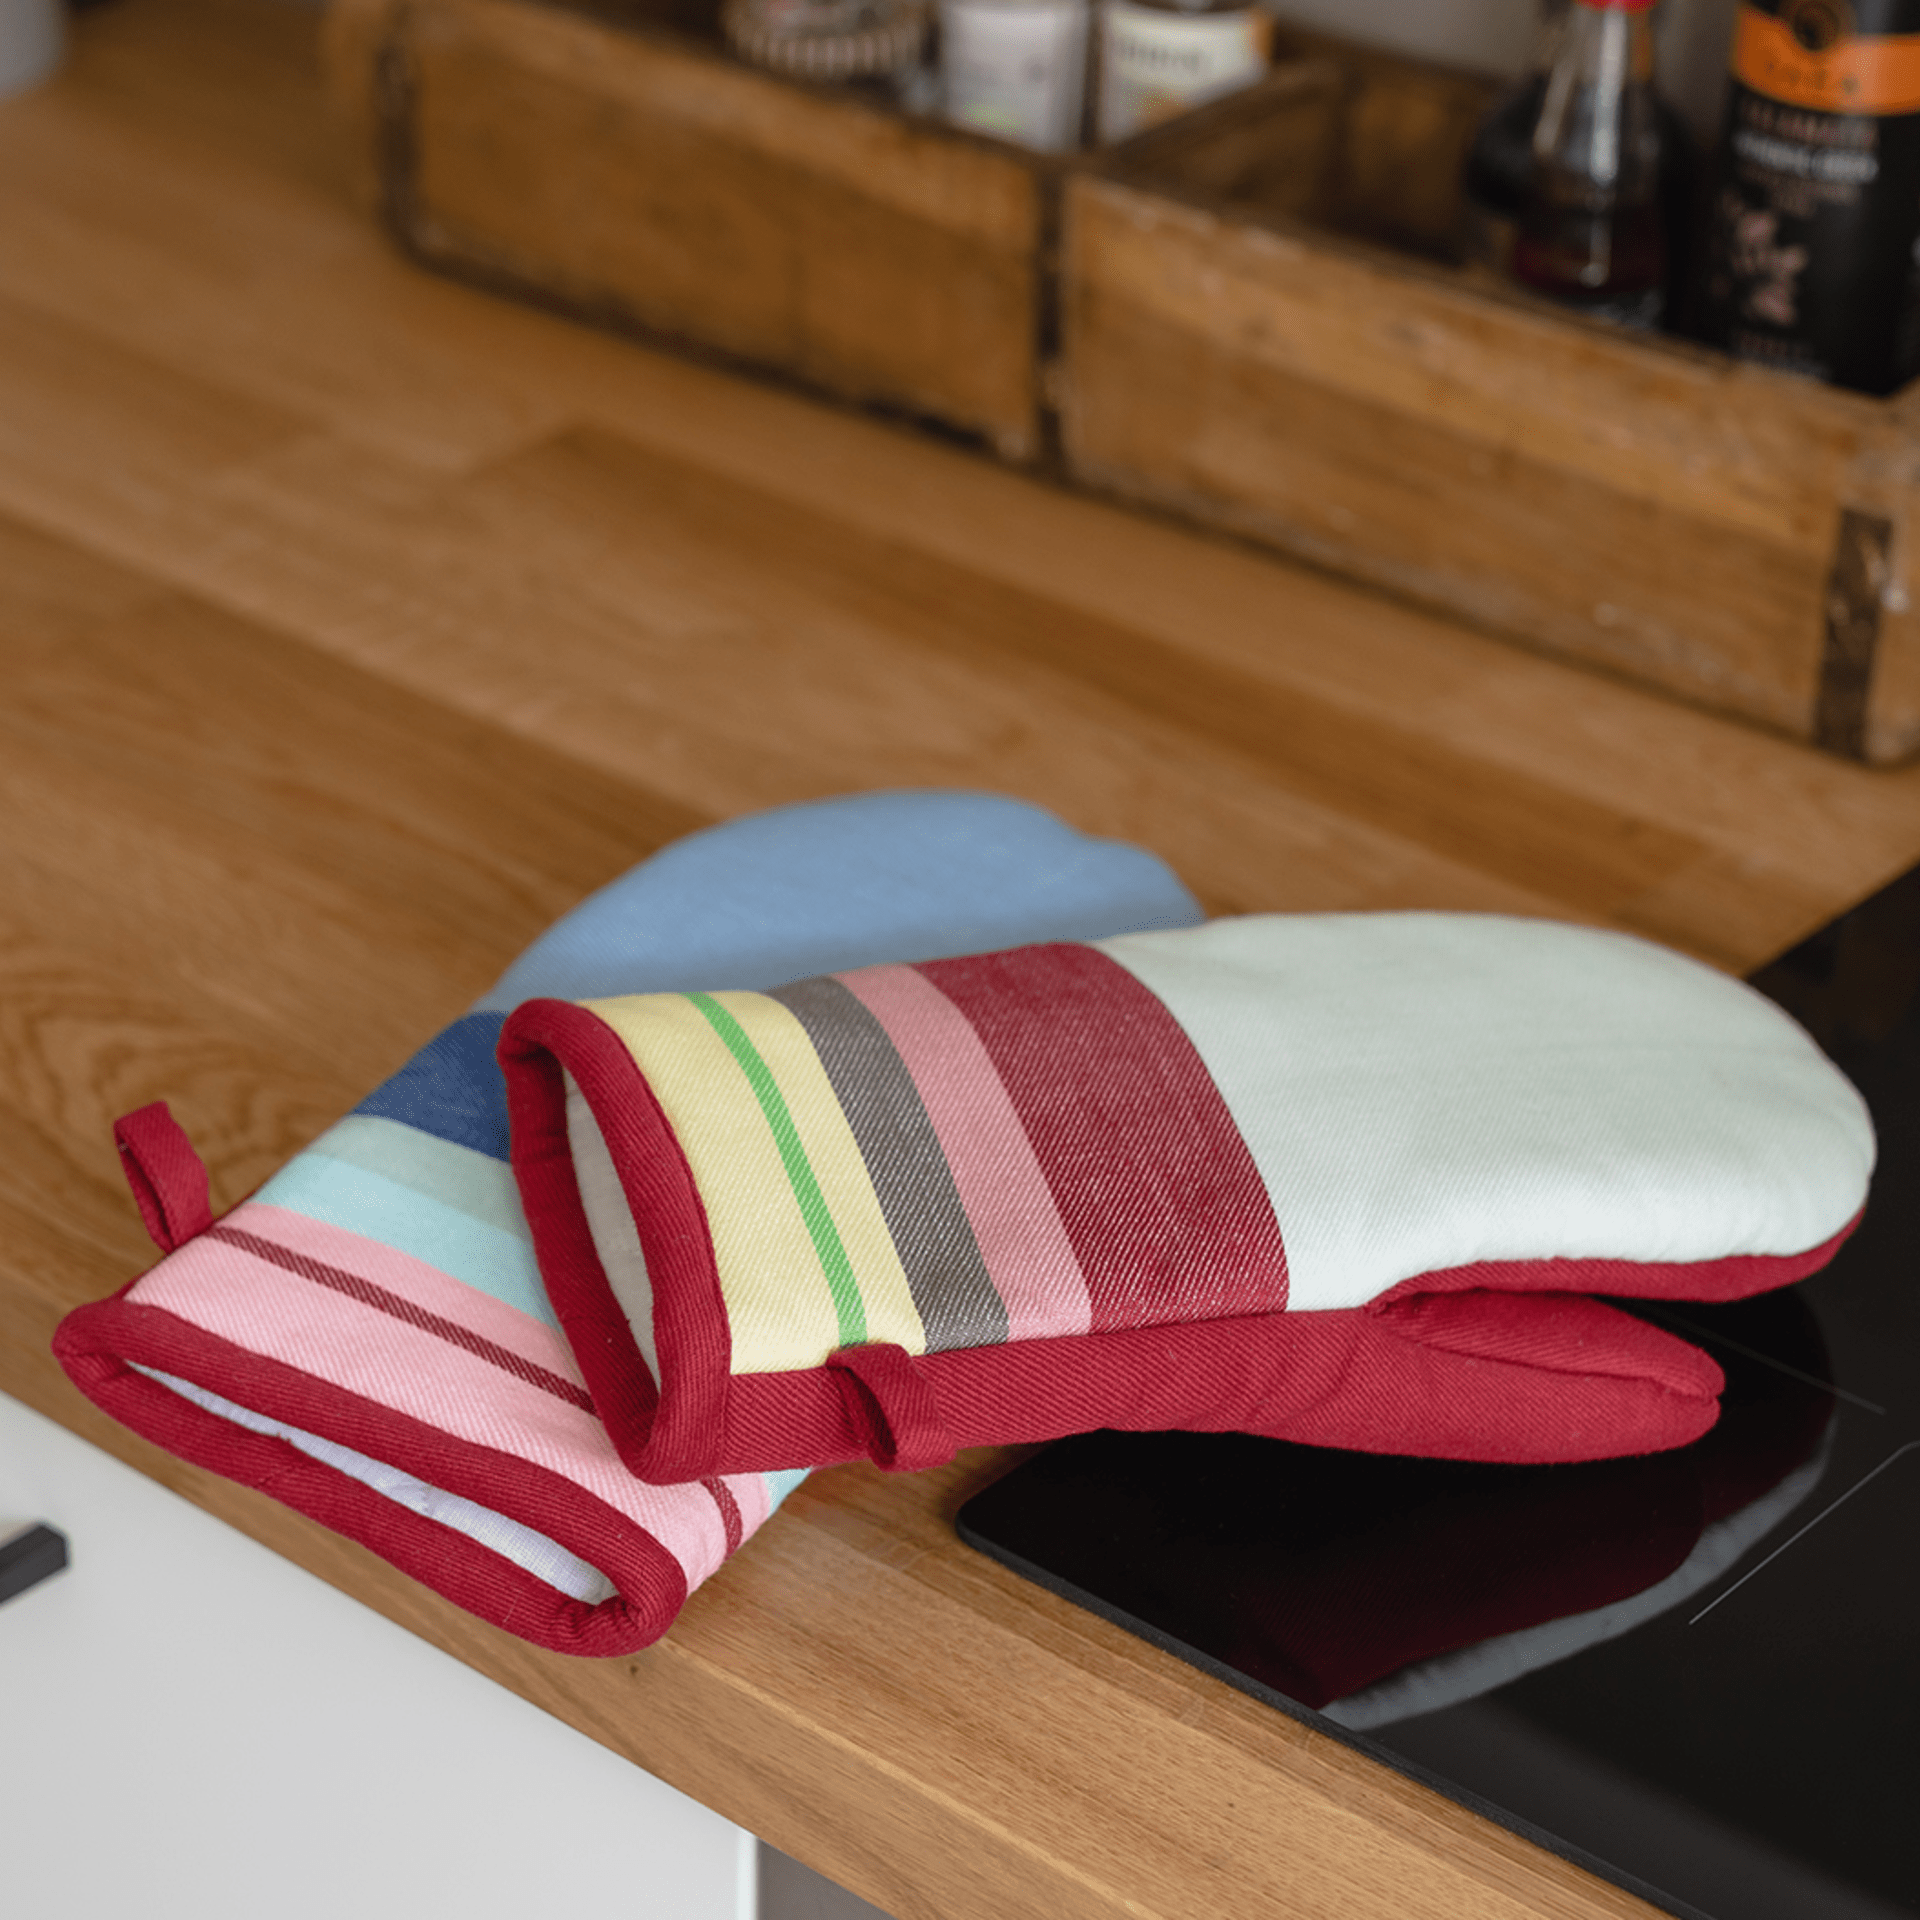 Oven mitts No. 1, set of 2